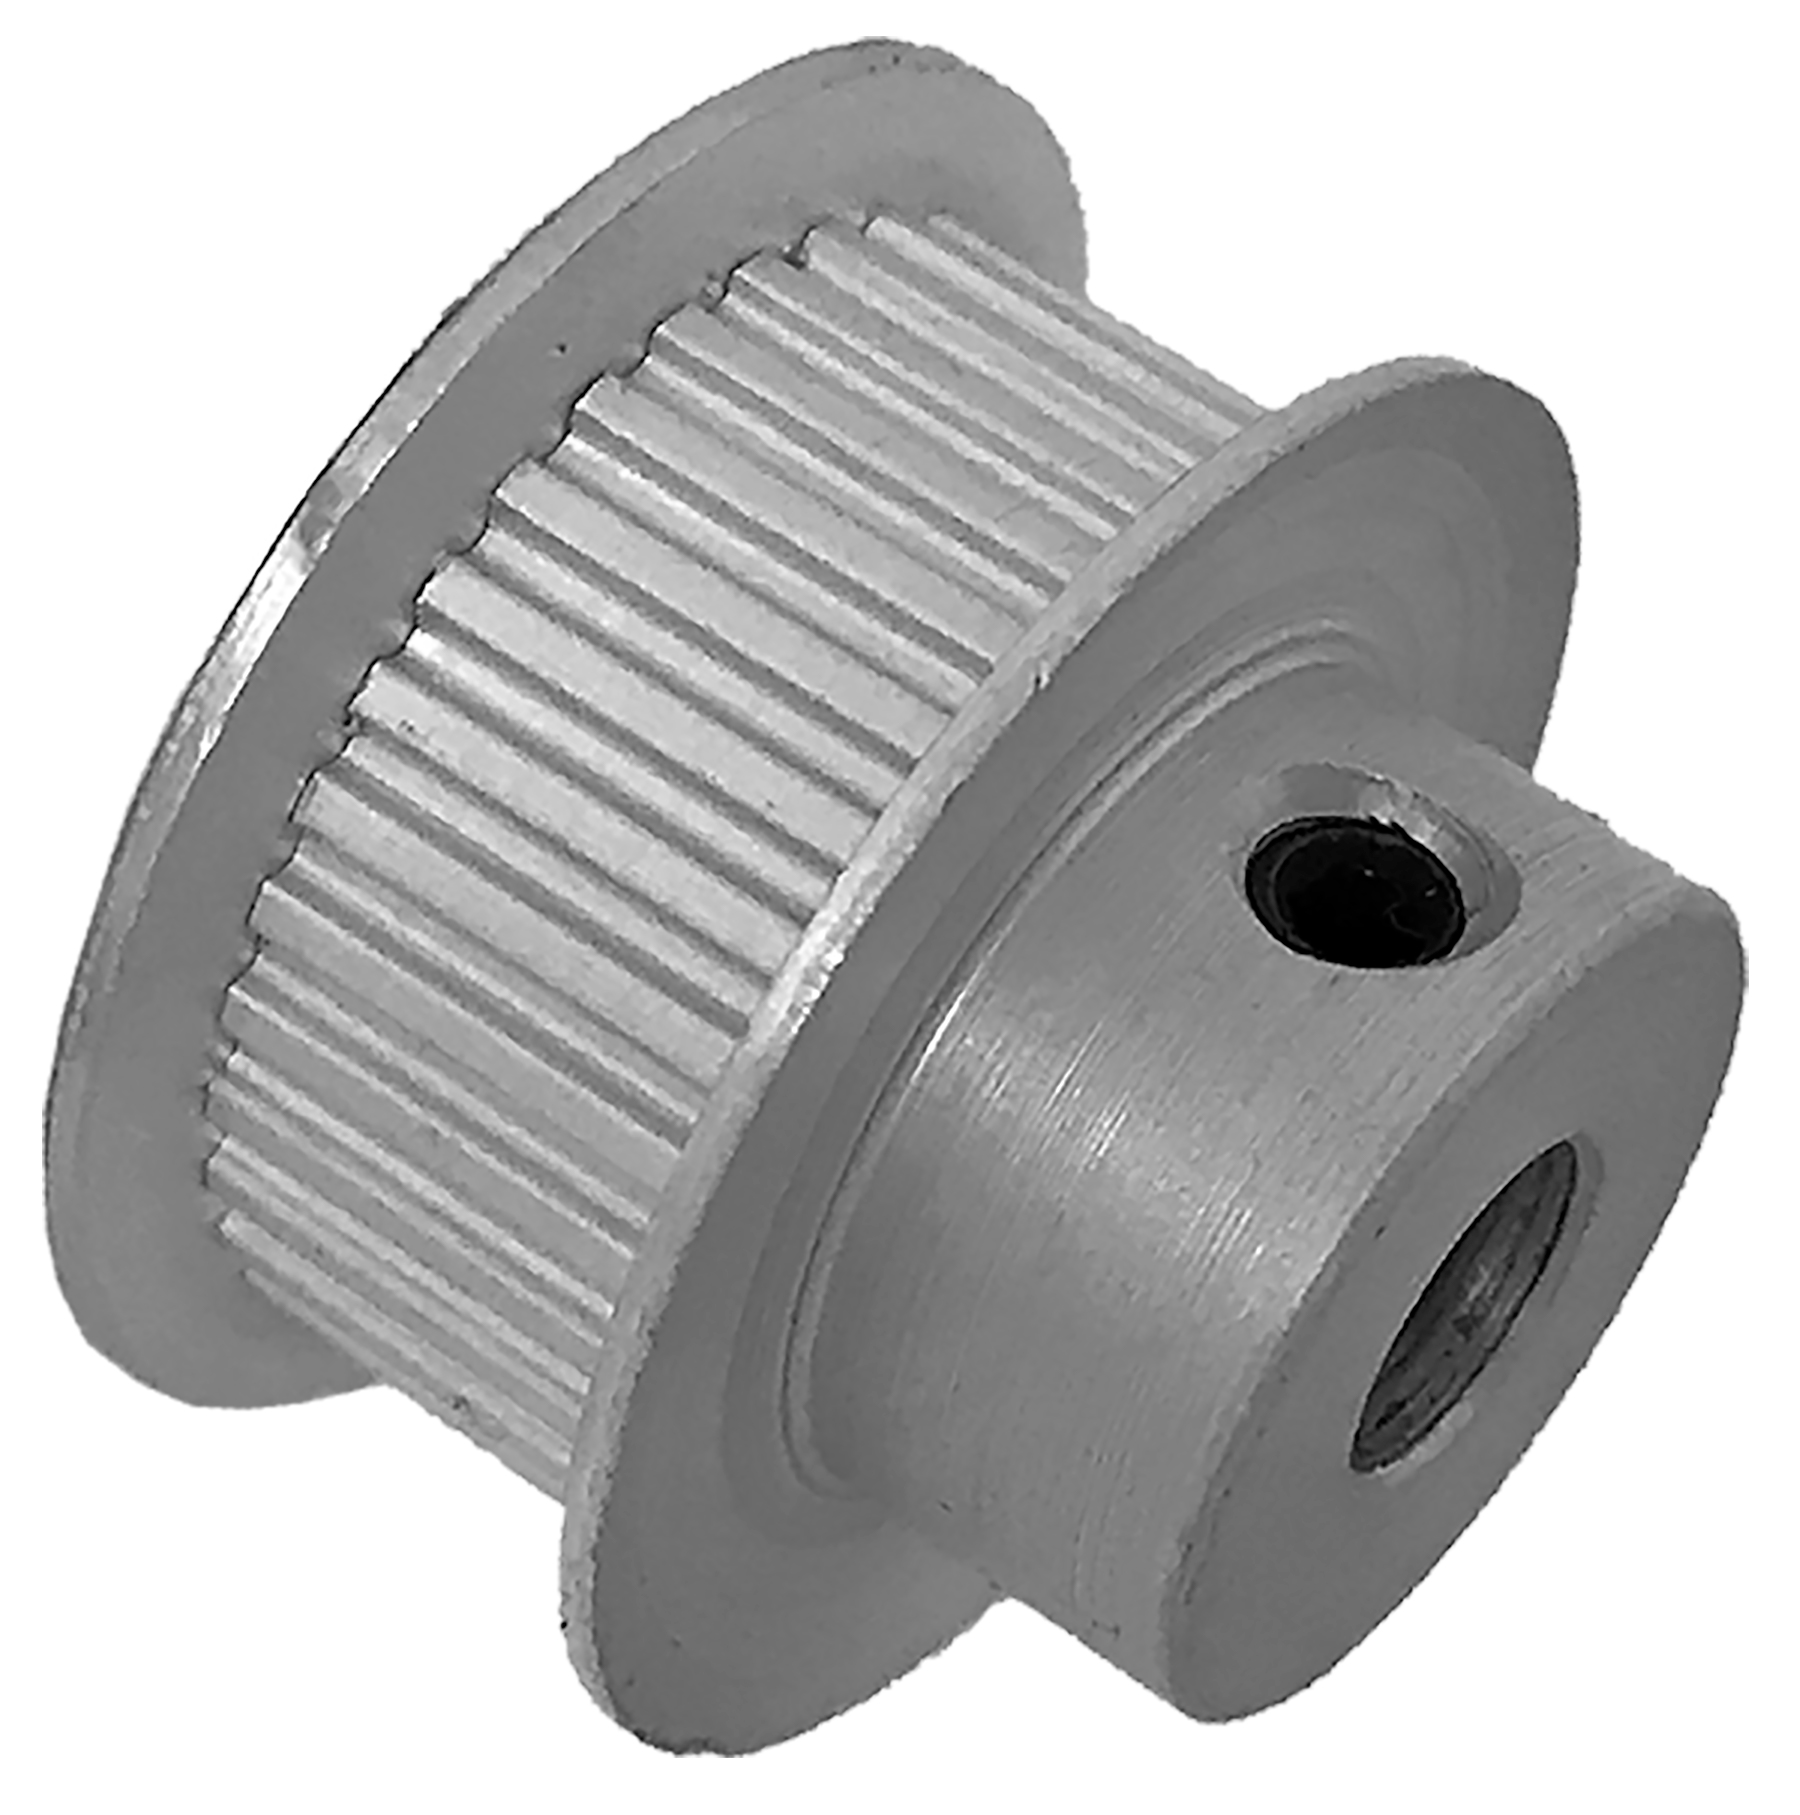 34LT187-6FA3 - Aluminum Imperial Pitch Pulleys